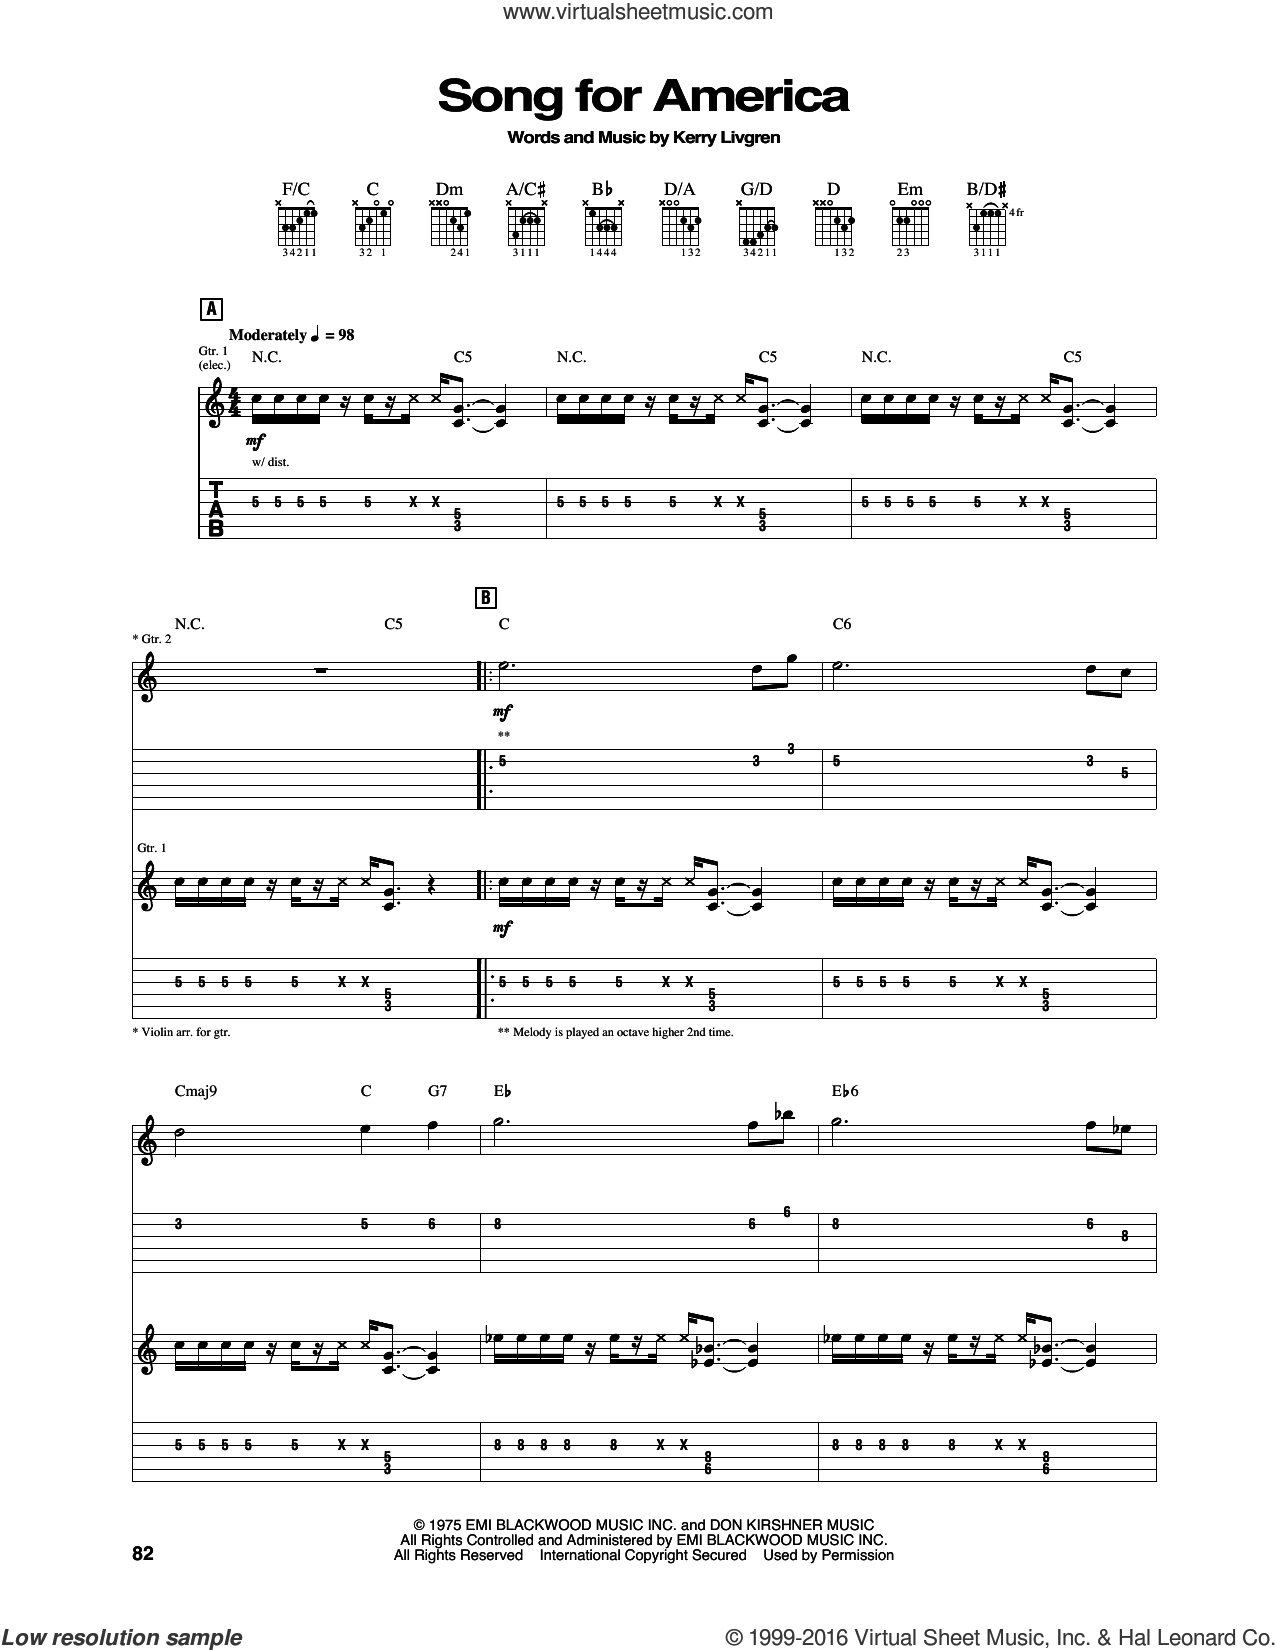 Play The Game Tonight sheet music for guitar (tablature) (PDF)